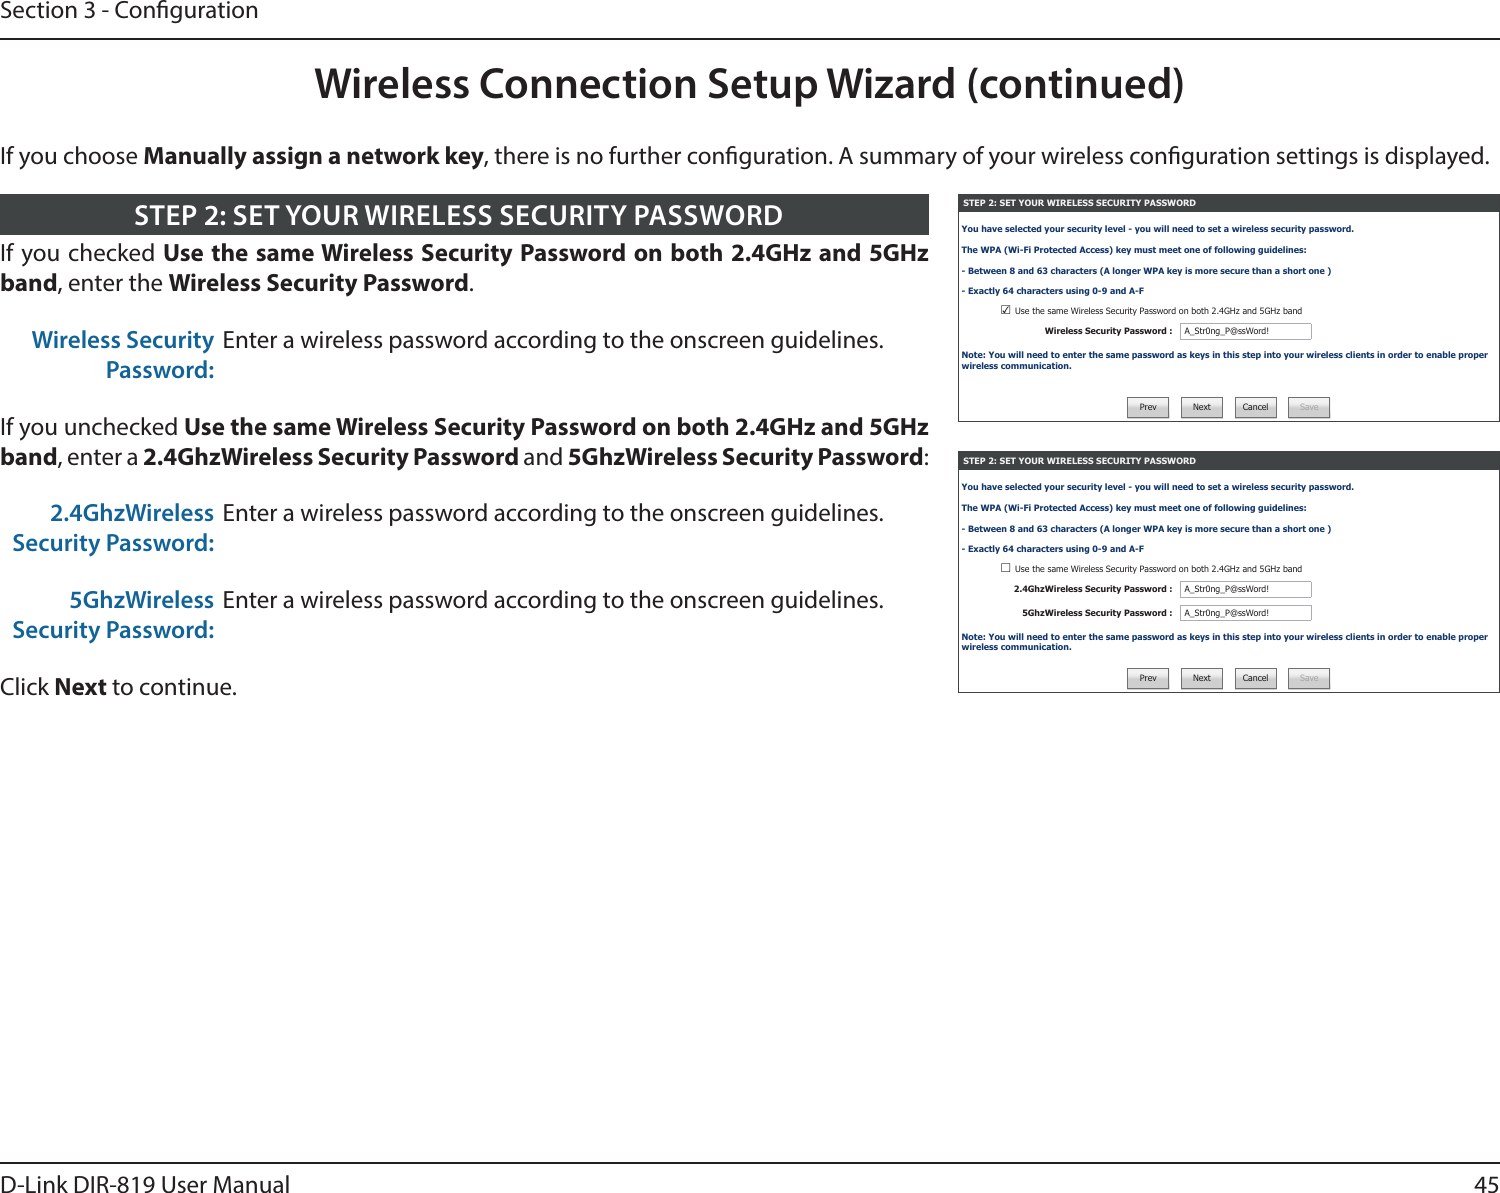 45D-Link DIR-819 User ManualSection 3 - CongurationWireless Connection Setup Wizard (continued)STEP 2: SET YOUR WIRELESS SECURITY PASSWORDYou have selected your security level - you will need to set a wireless security password.The WPA (Wi-Fi Protected Access) key must meet one of following guidelines:- Between 8 and 63 characters (A longer WPA key is more secure than a short one )- Exactly 64 characters using 0-9 and A-F☑ Use the same Wireless Security Password on both 2.4GHz and 5GHz bandWireless Security Password : A_Str0ng_P@ssWord!Note: You will need to enter the same password as keys in this step into your wireless clients in order to enable proper wireless communication.Prev Next Cancel SaveSTEP 2: SET YOUR WIRELESS SECURITY PASSWORDYou have selected your security level - you will need to set a wireless security password.The WPA (Wi-Fi Protected Access) key must meet one of following guidelines:- Between 8 and 63 characters (A longer WPA key is more secure than a short one )- Exactly 64 characters using 0-9 and A-F☐ Use the same Wireless Security Password on both 2.4GHz and 5GHz band2.4GhzWireless Security Password : A_Str0ng_P@ssWord!5GhzWireless Security Password : A_Str0ng_P@ssWord!Note: You will need to enter the same password as keys in this step into your wireless clients in order to enable proper wireless communication.Prev Next Cancel SaveIf you checked Use the same Wireless Security Password on both 2.4GHz and 5GHz band, enter the Wireless Security Password.Wireless Security Password:Enter a wireless password according to the onscreen guidelines.If you unchecked Use the same Wireless Security Password on both 2.4GHz and 5GHz band, enter a 2.4GhzWireless Security Password and 5GhzWireless Security Password:2.4GhzWireless Security Password:Enter a wireless password according to the onscreen guidelines.5GhzWireless Security Password:Enter a wireless password according to the onscreen guidelines.Click Next to continue.STEP 2: SET YOUR WIRELESS SECURITY PASSWORDIf you choose Manually assign a network key, there is no further conguration. A summary of your wireless conguration settings is displayed.